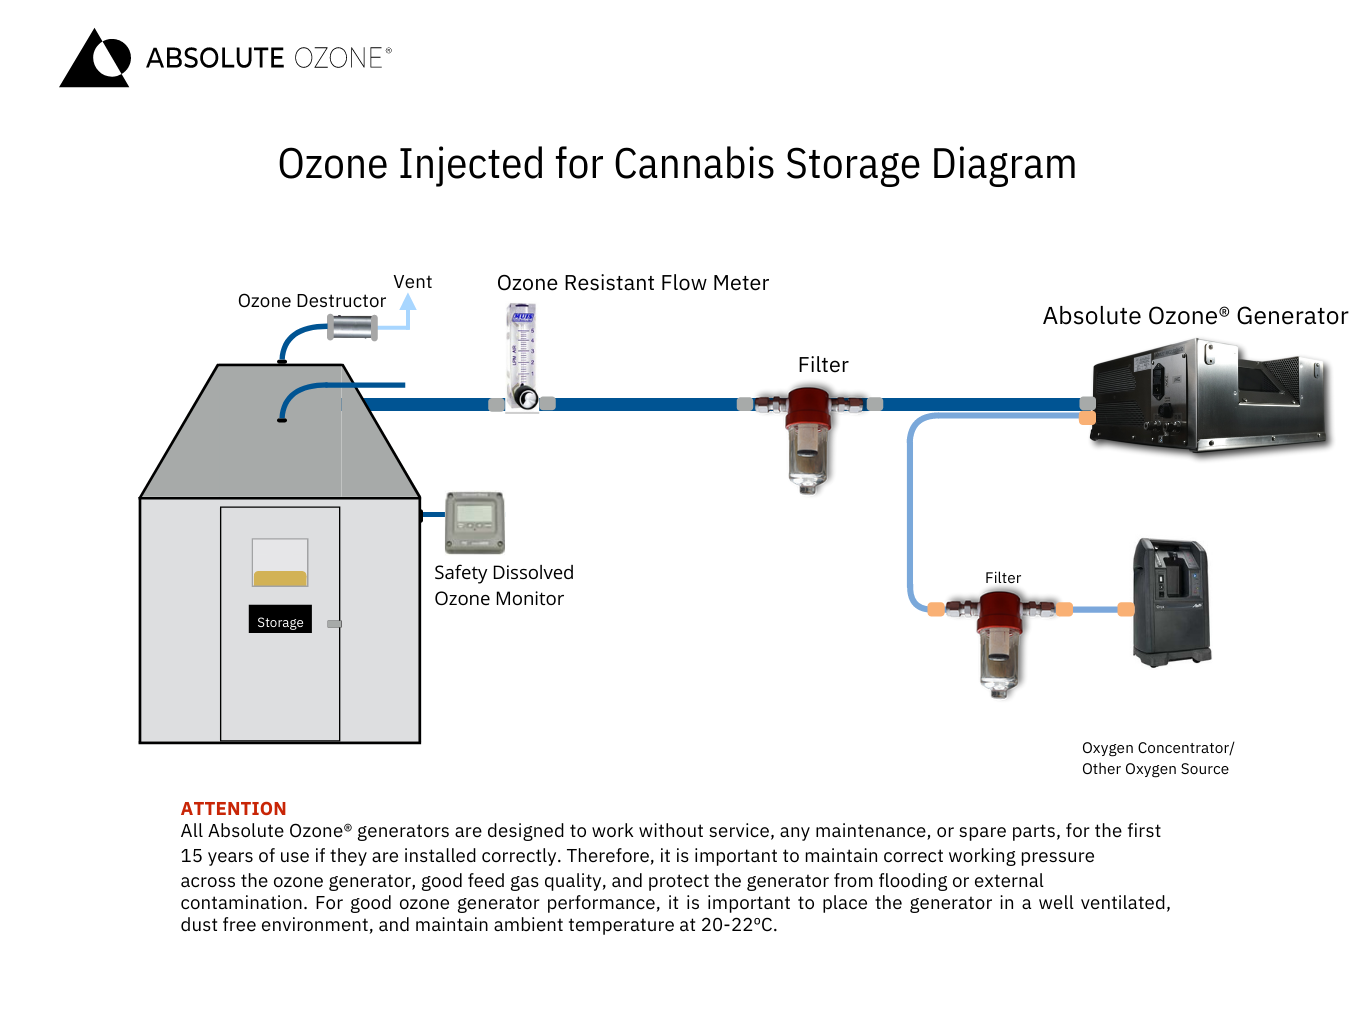 ozone injected for cannabis storage diagram